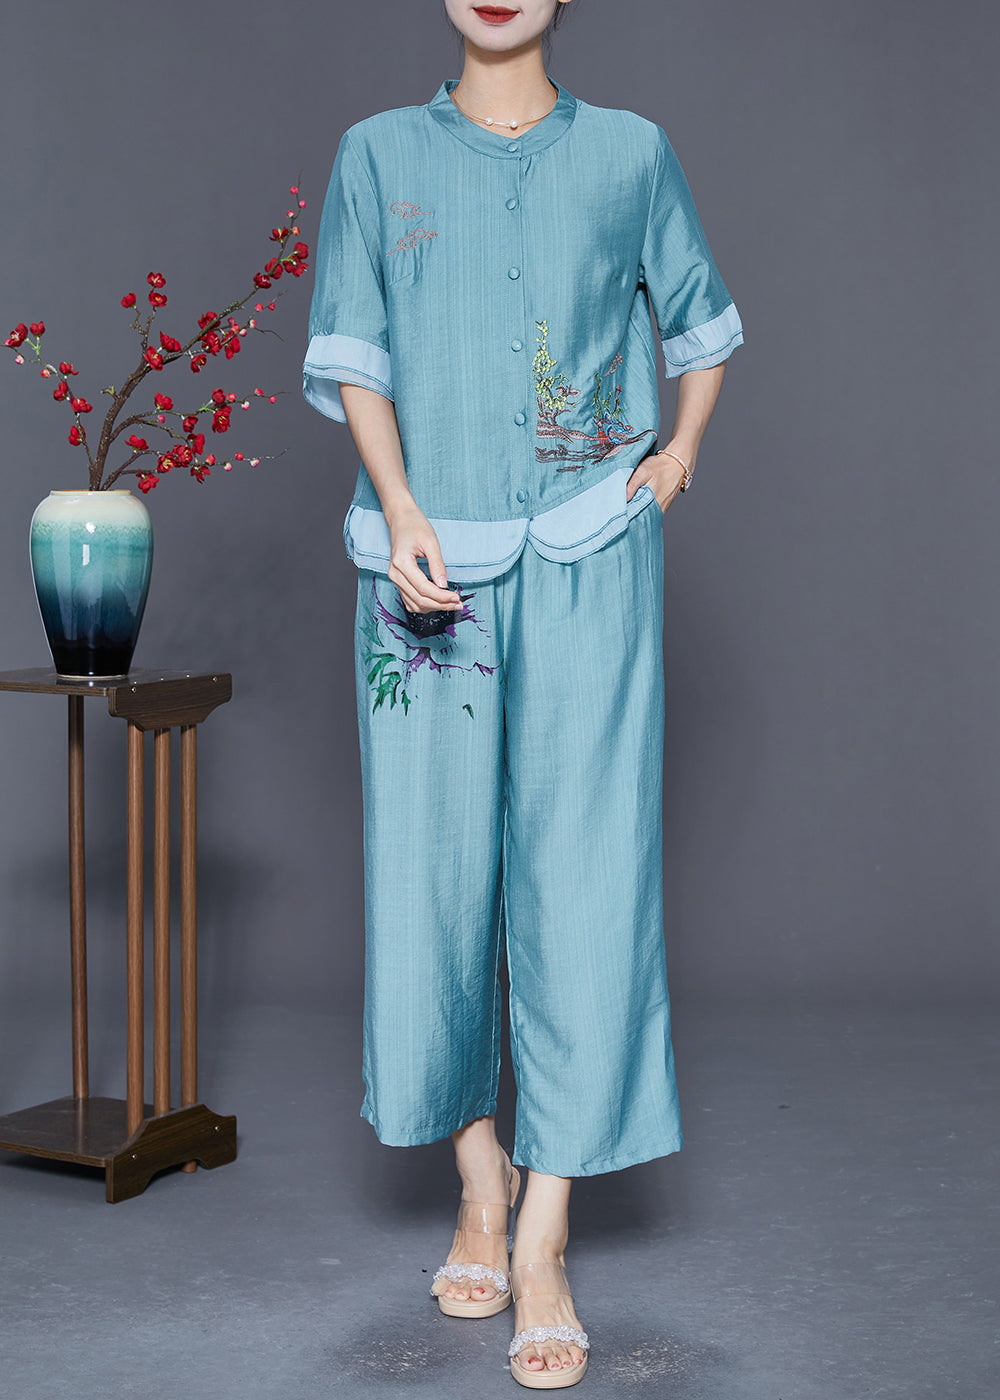 Lake Blue Patchwork Linen Silk Two Piece Set Women Clothing Embroideried Summer LY5593 - fabuloryshop